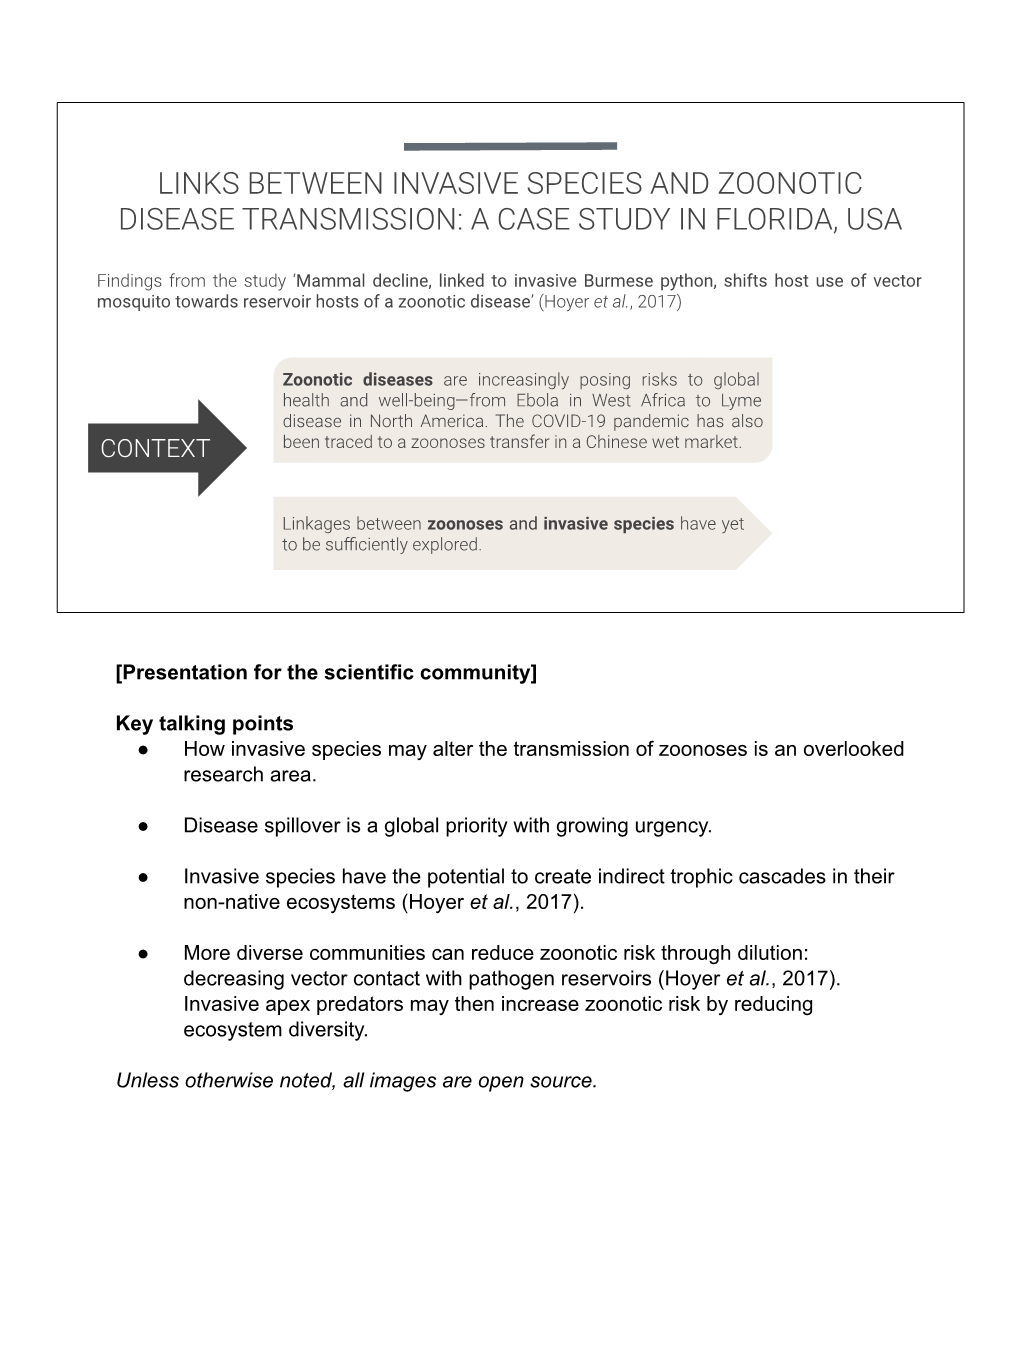 Links Between Invasive Species and Zoonotic Disease Transmission: a Case Study in Florida, Usa